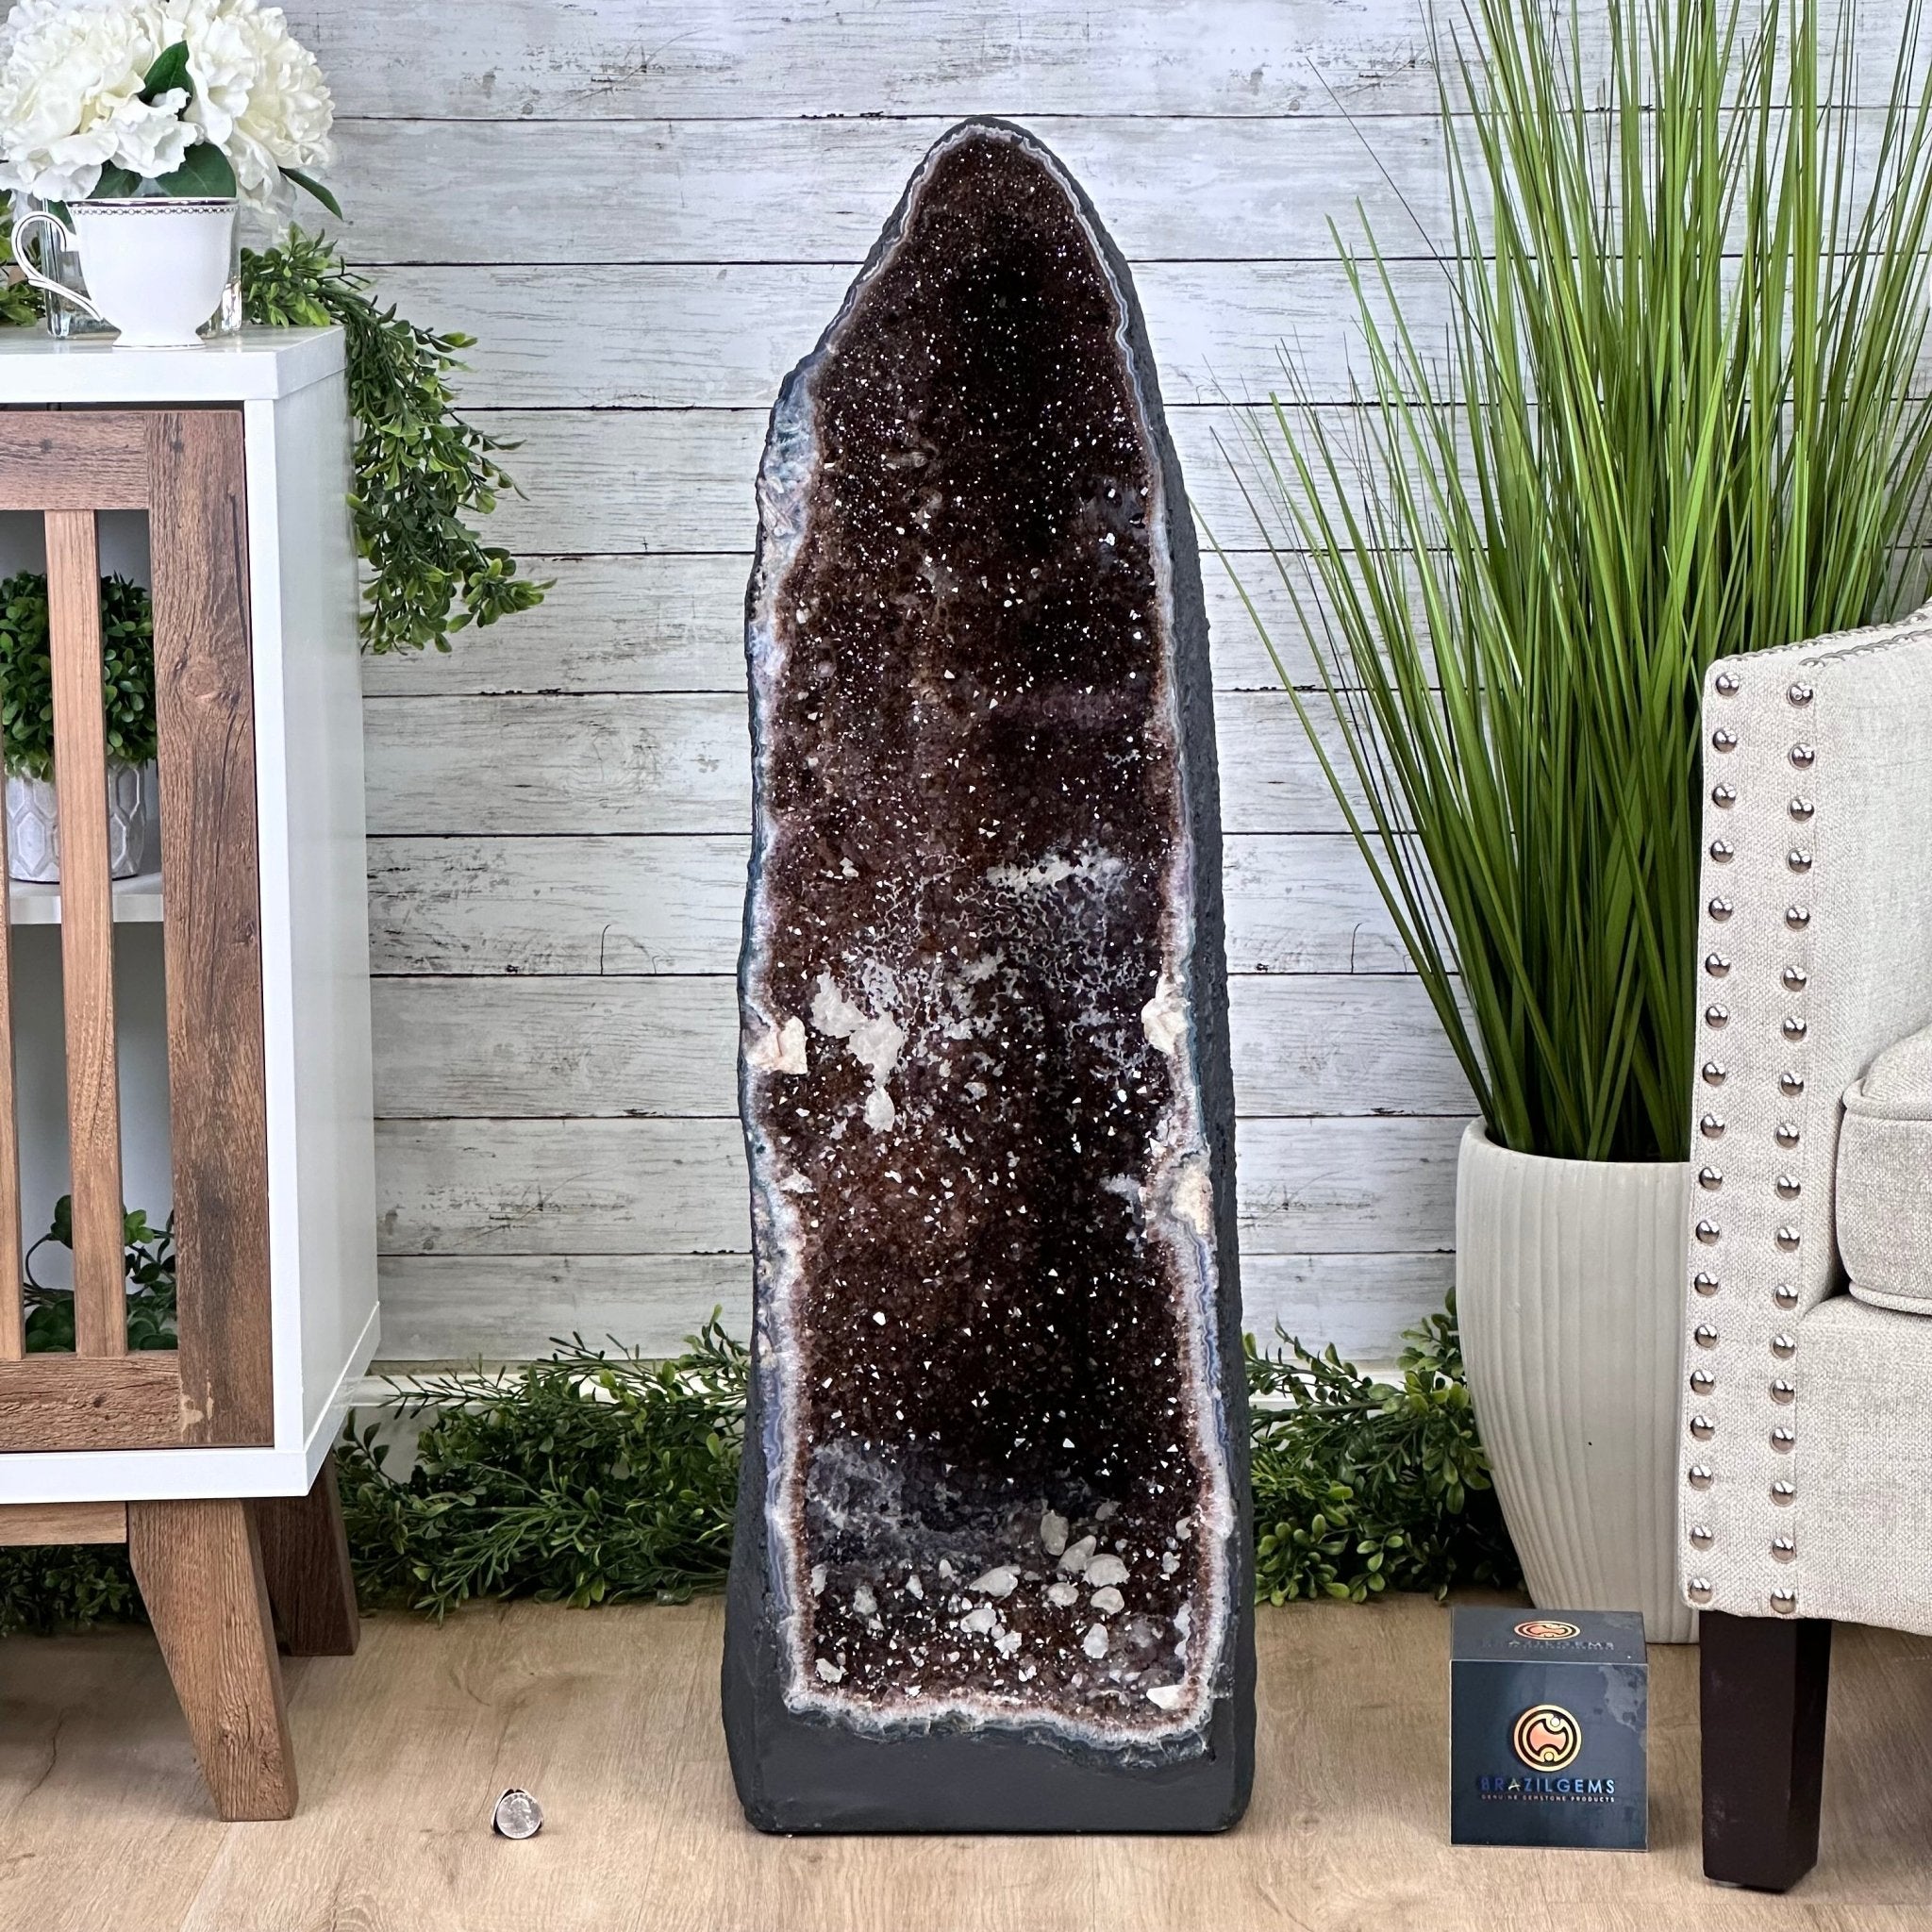 Extra Quality Brazilian Amethyst Cathedral, 131 lbs & 36" Tall #5601-1270 - Brazil GemsBrazil GemsExtra Quality Brazilian Amethyst Cathedral, 131 lbs & 36" Tall #5601-1270Cathedrals5601-1270